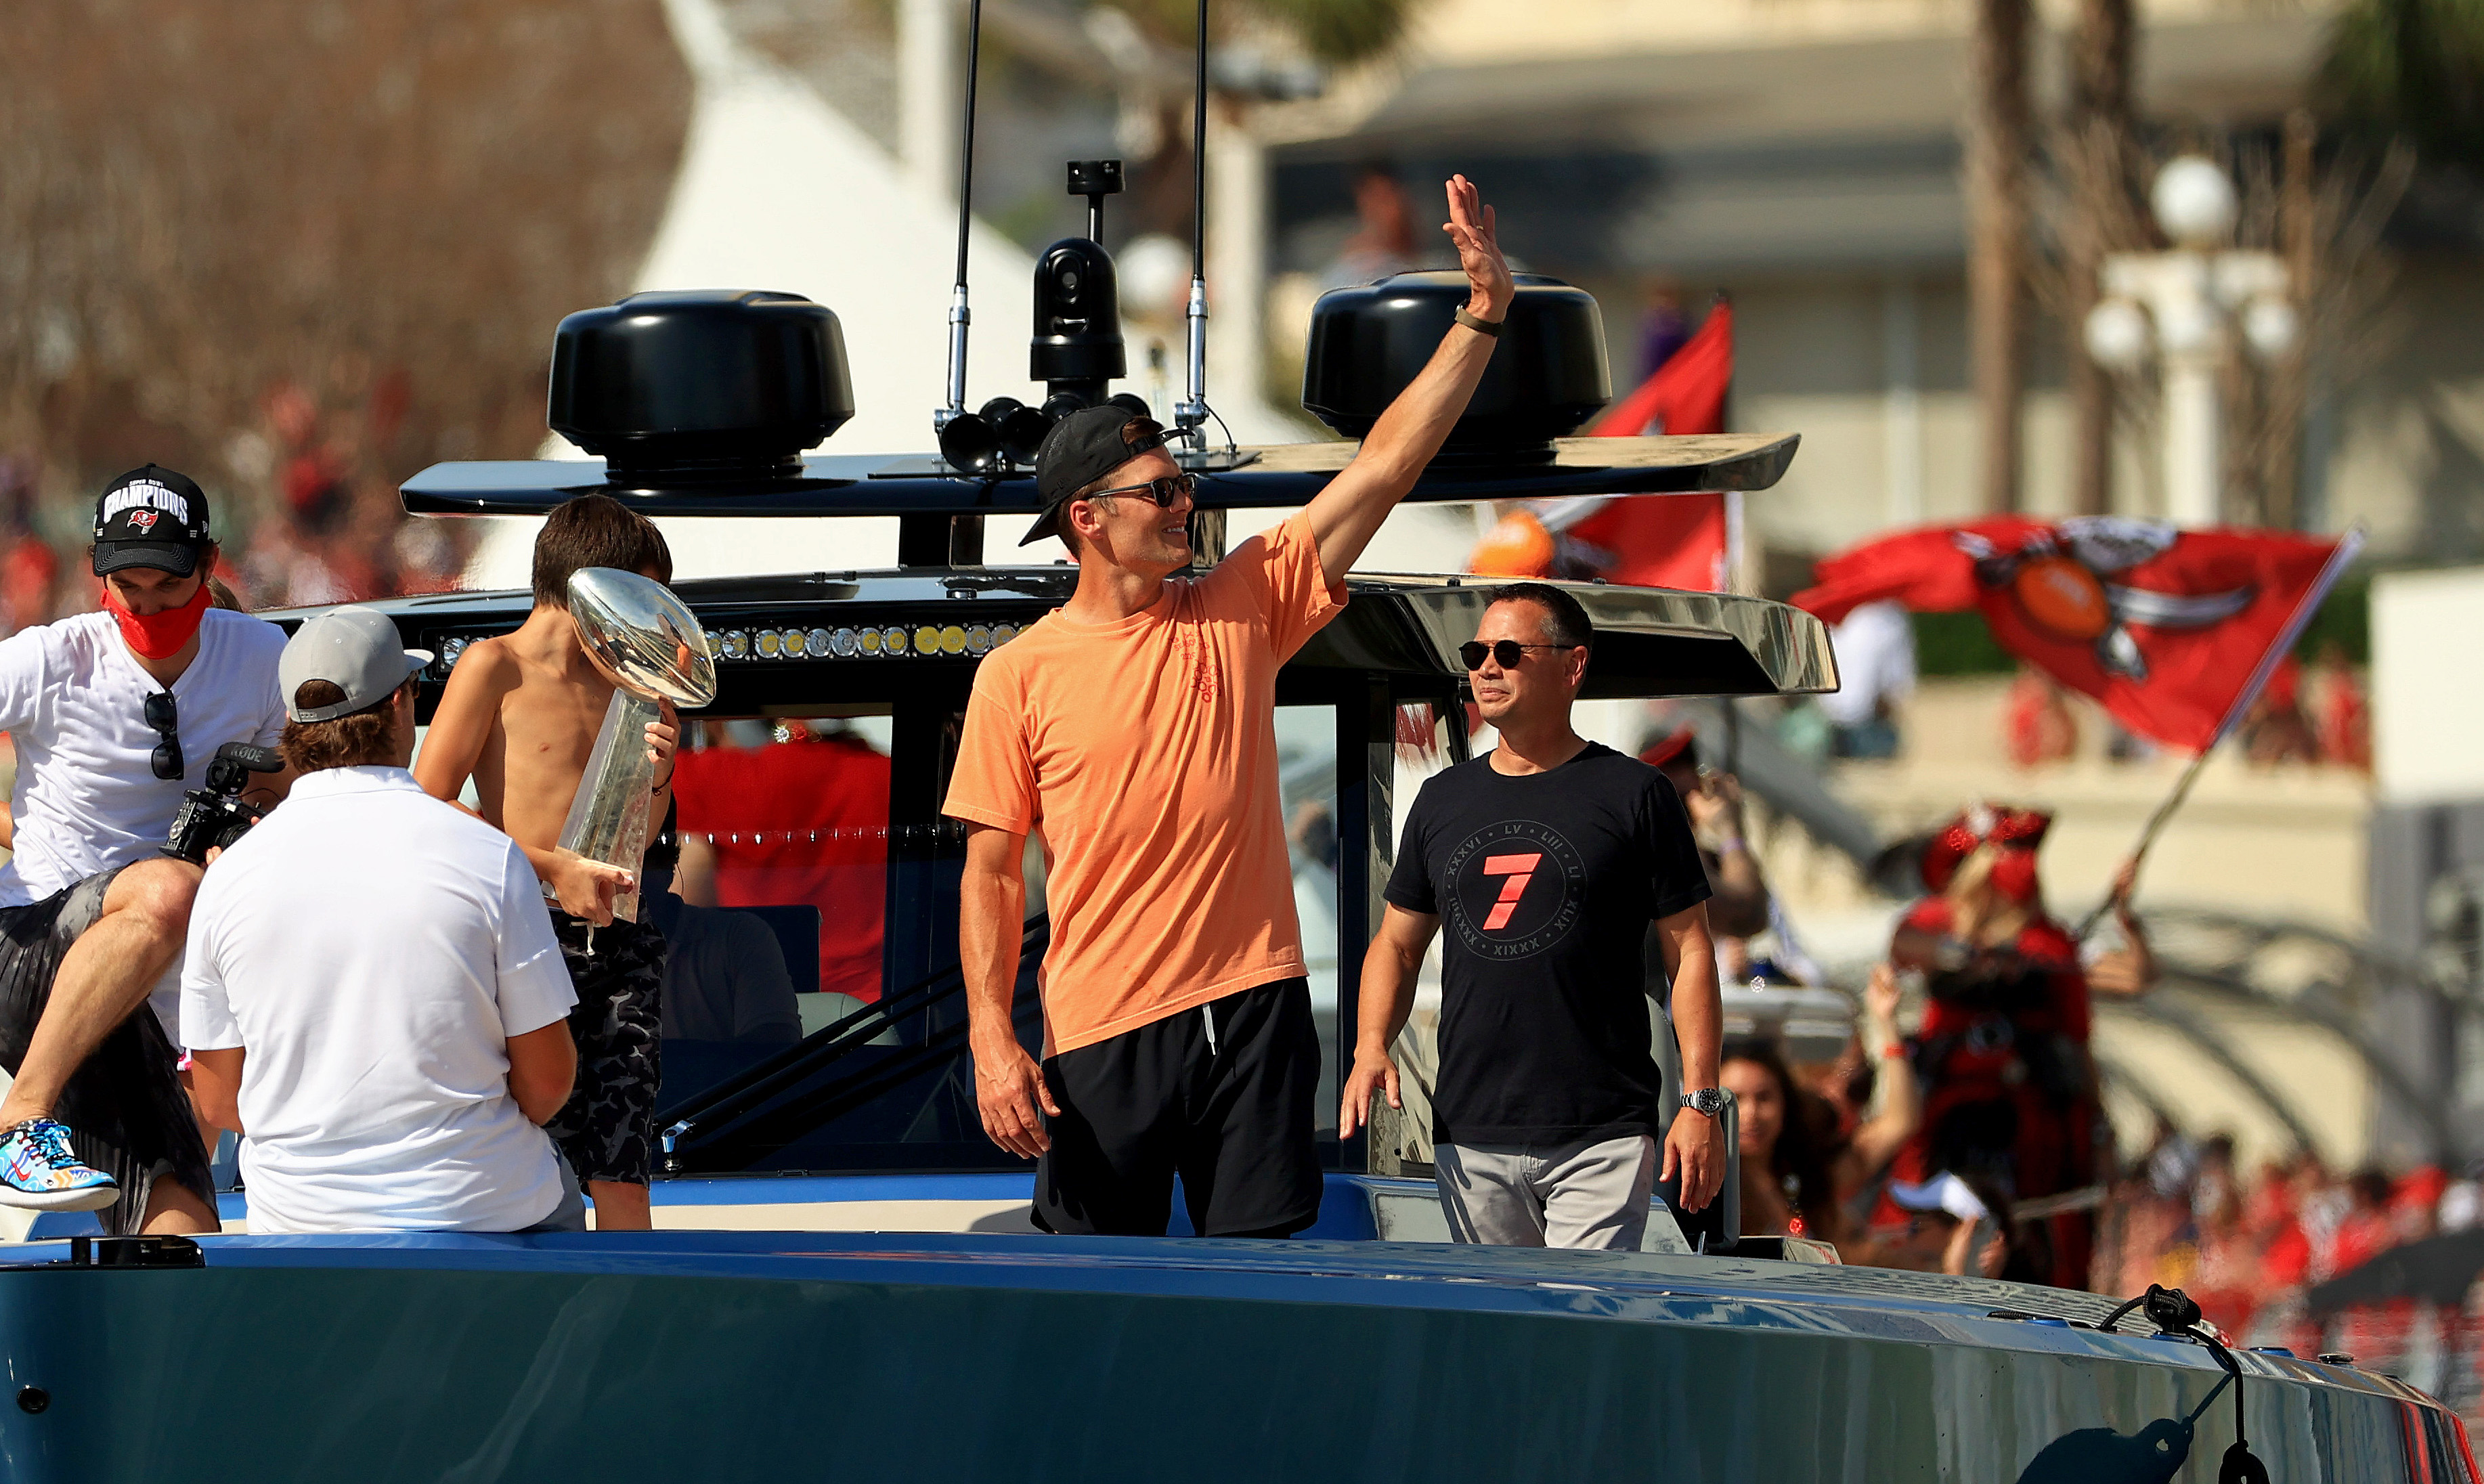 Tom Brady Cruises to Super Bowl Parade in His Own Yacht